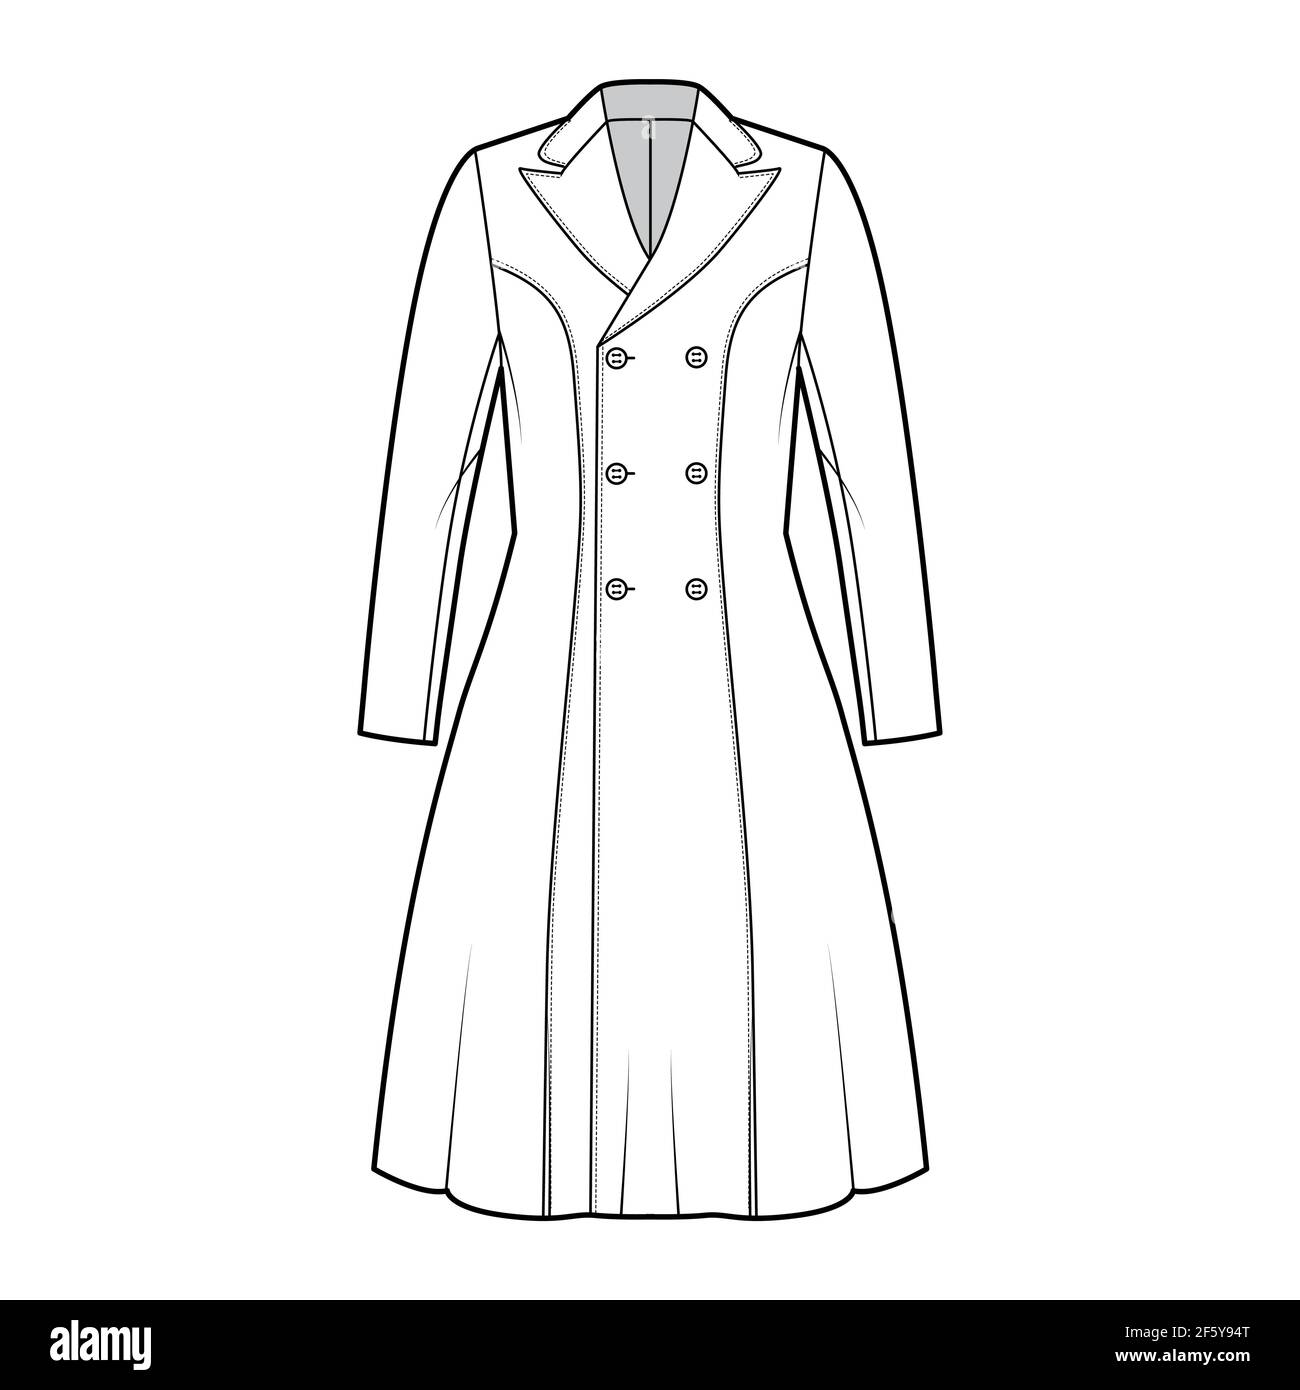 Princess line coat technical fashion illustration with double breasted, fitted body, peak lapel collar, knee length. Flat jacket template front, white color style. Women, men, unisex top CAD mockup Stock Vector